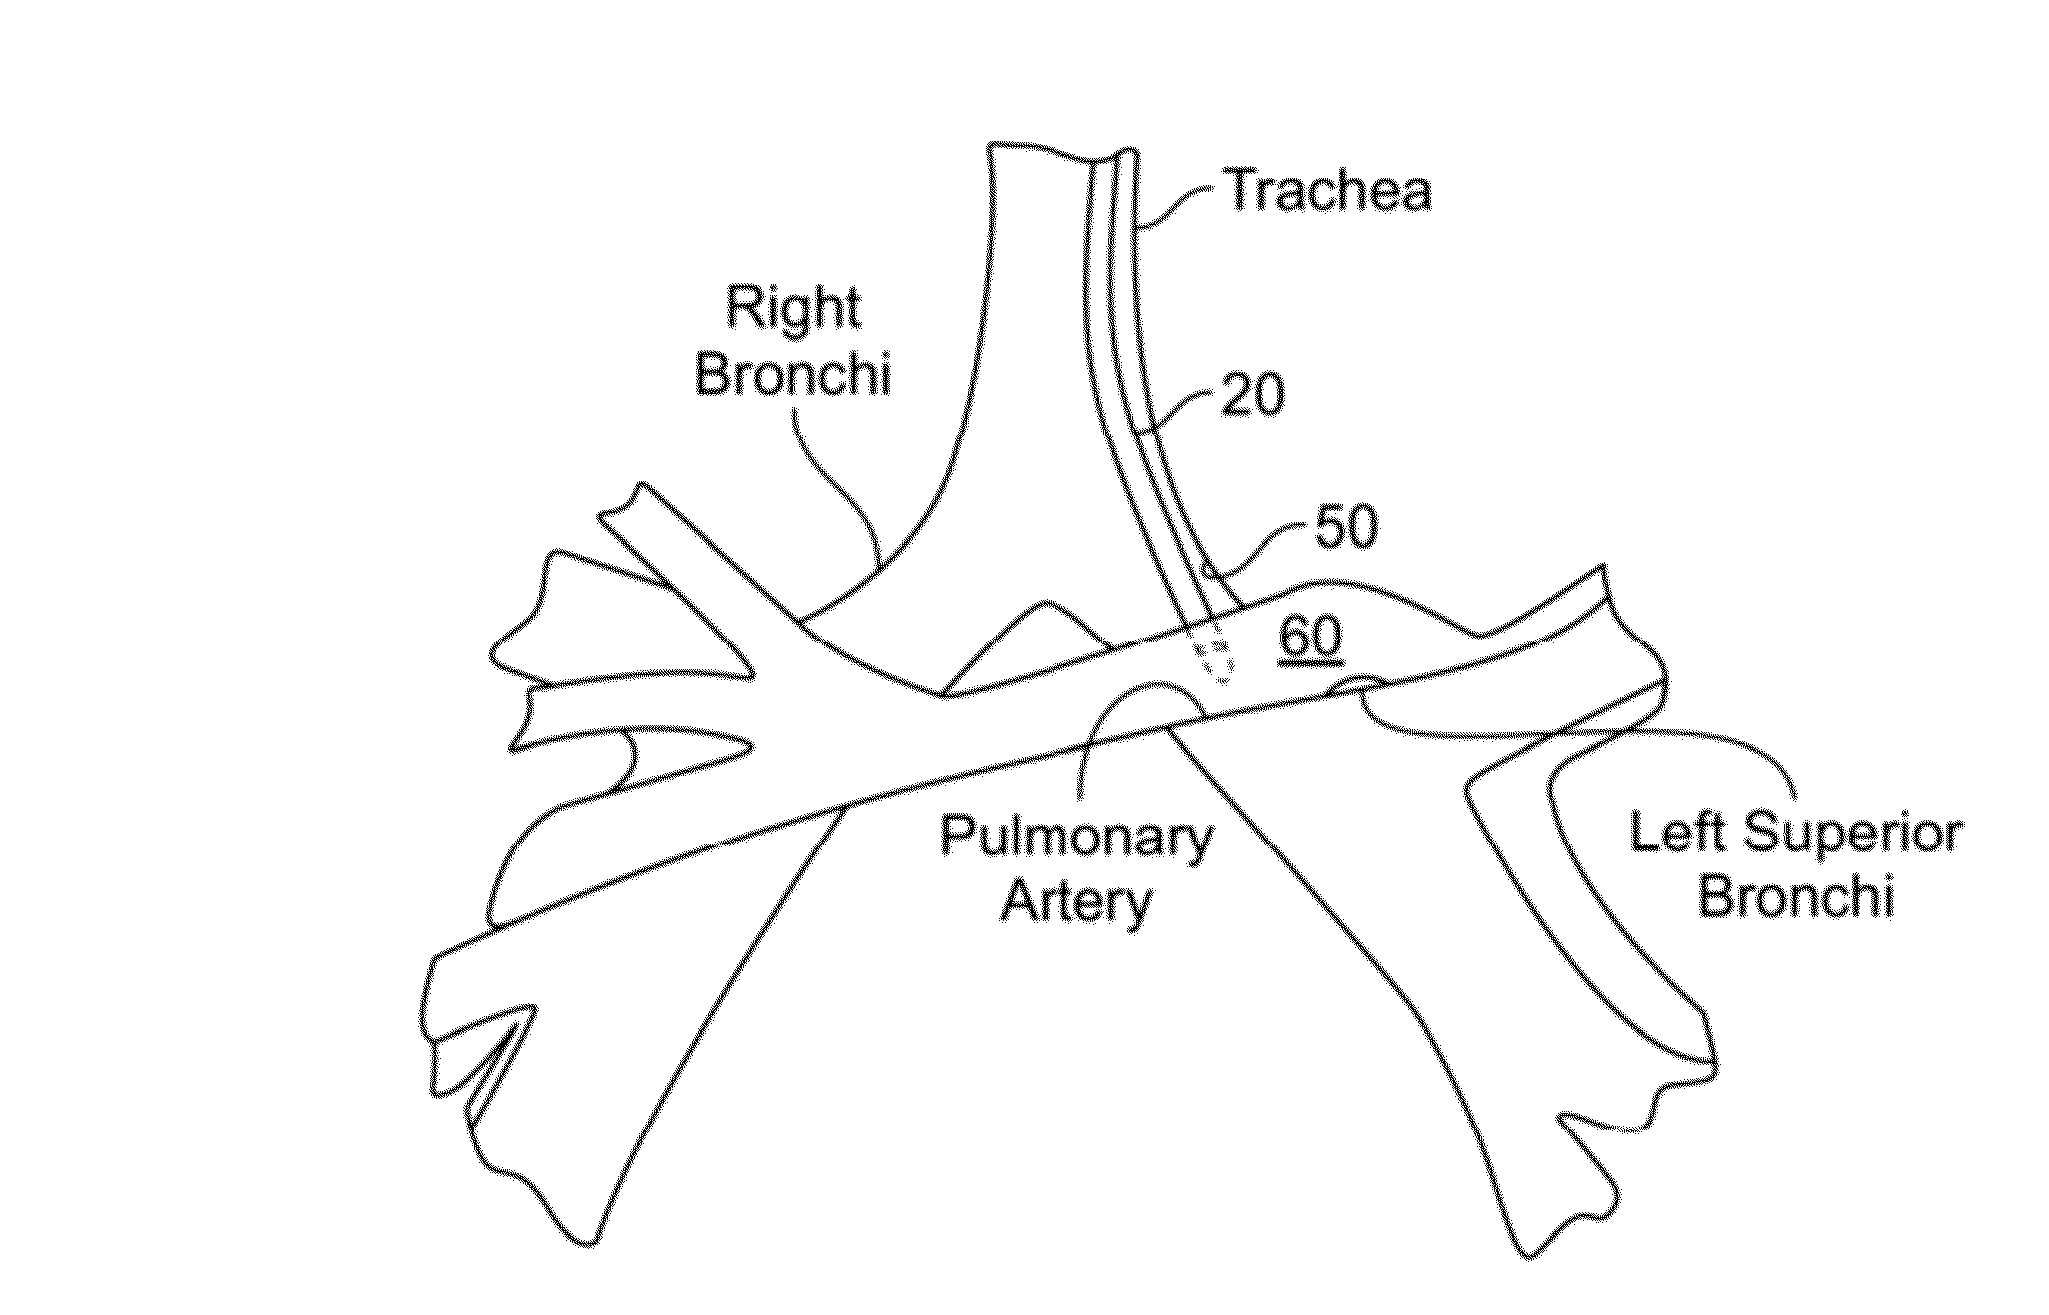 Method and system for measuring pulmonary artery circulation information